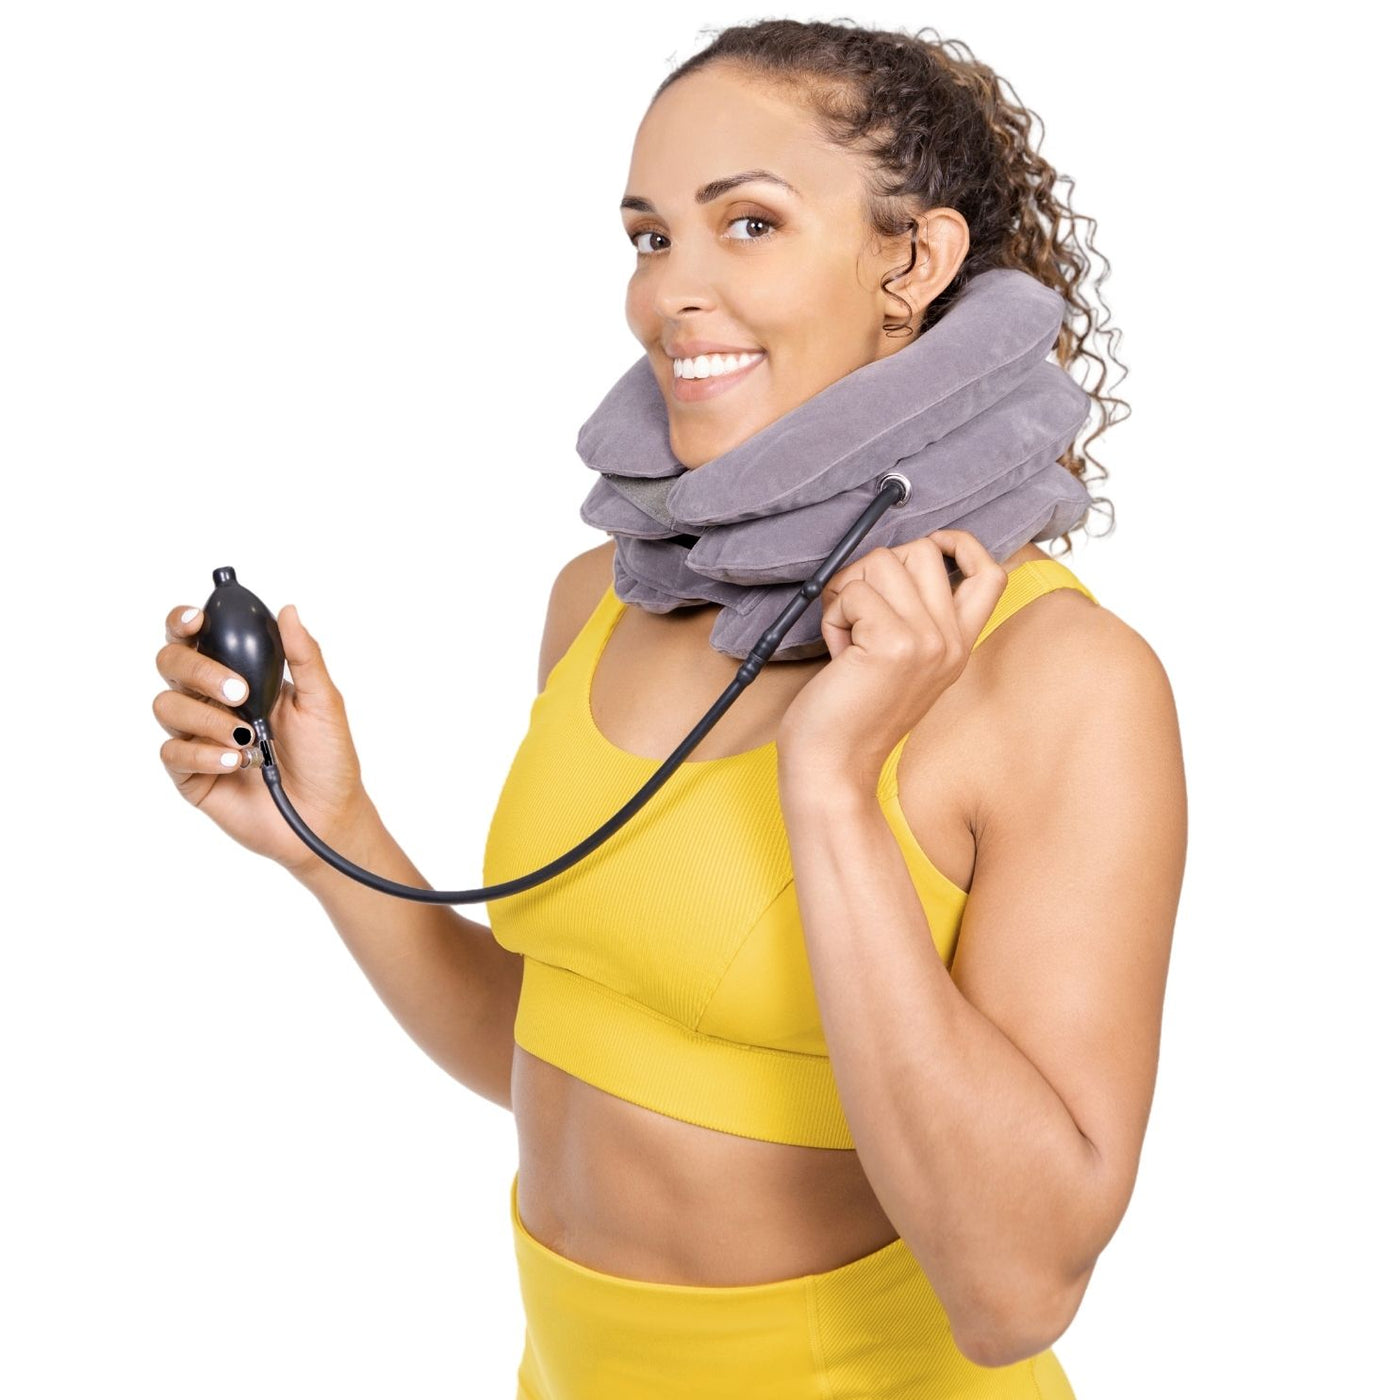 Neck Braces As a Preventive Measure For Cervical Issues